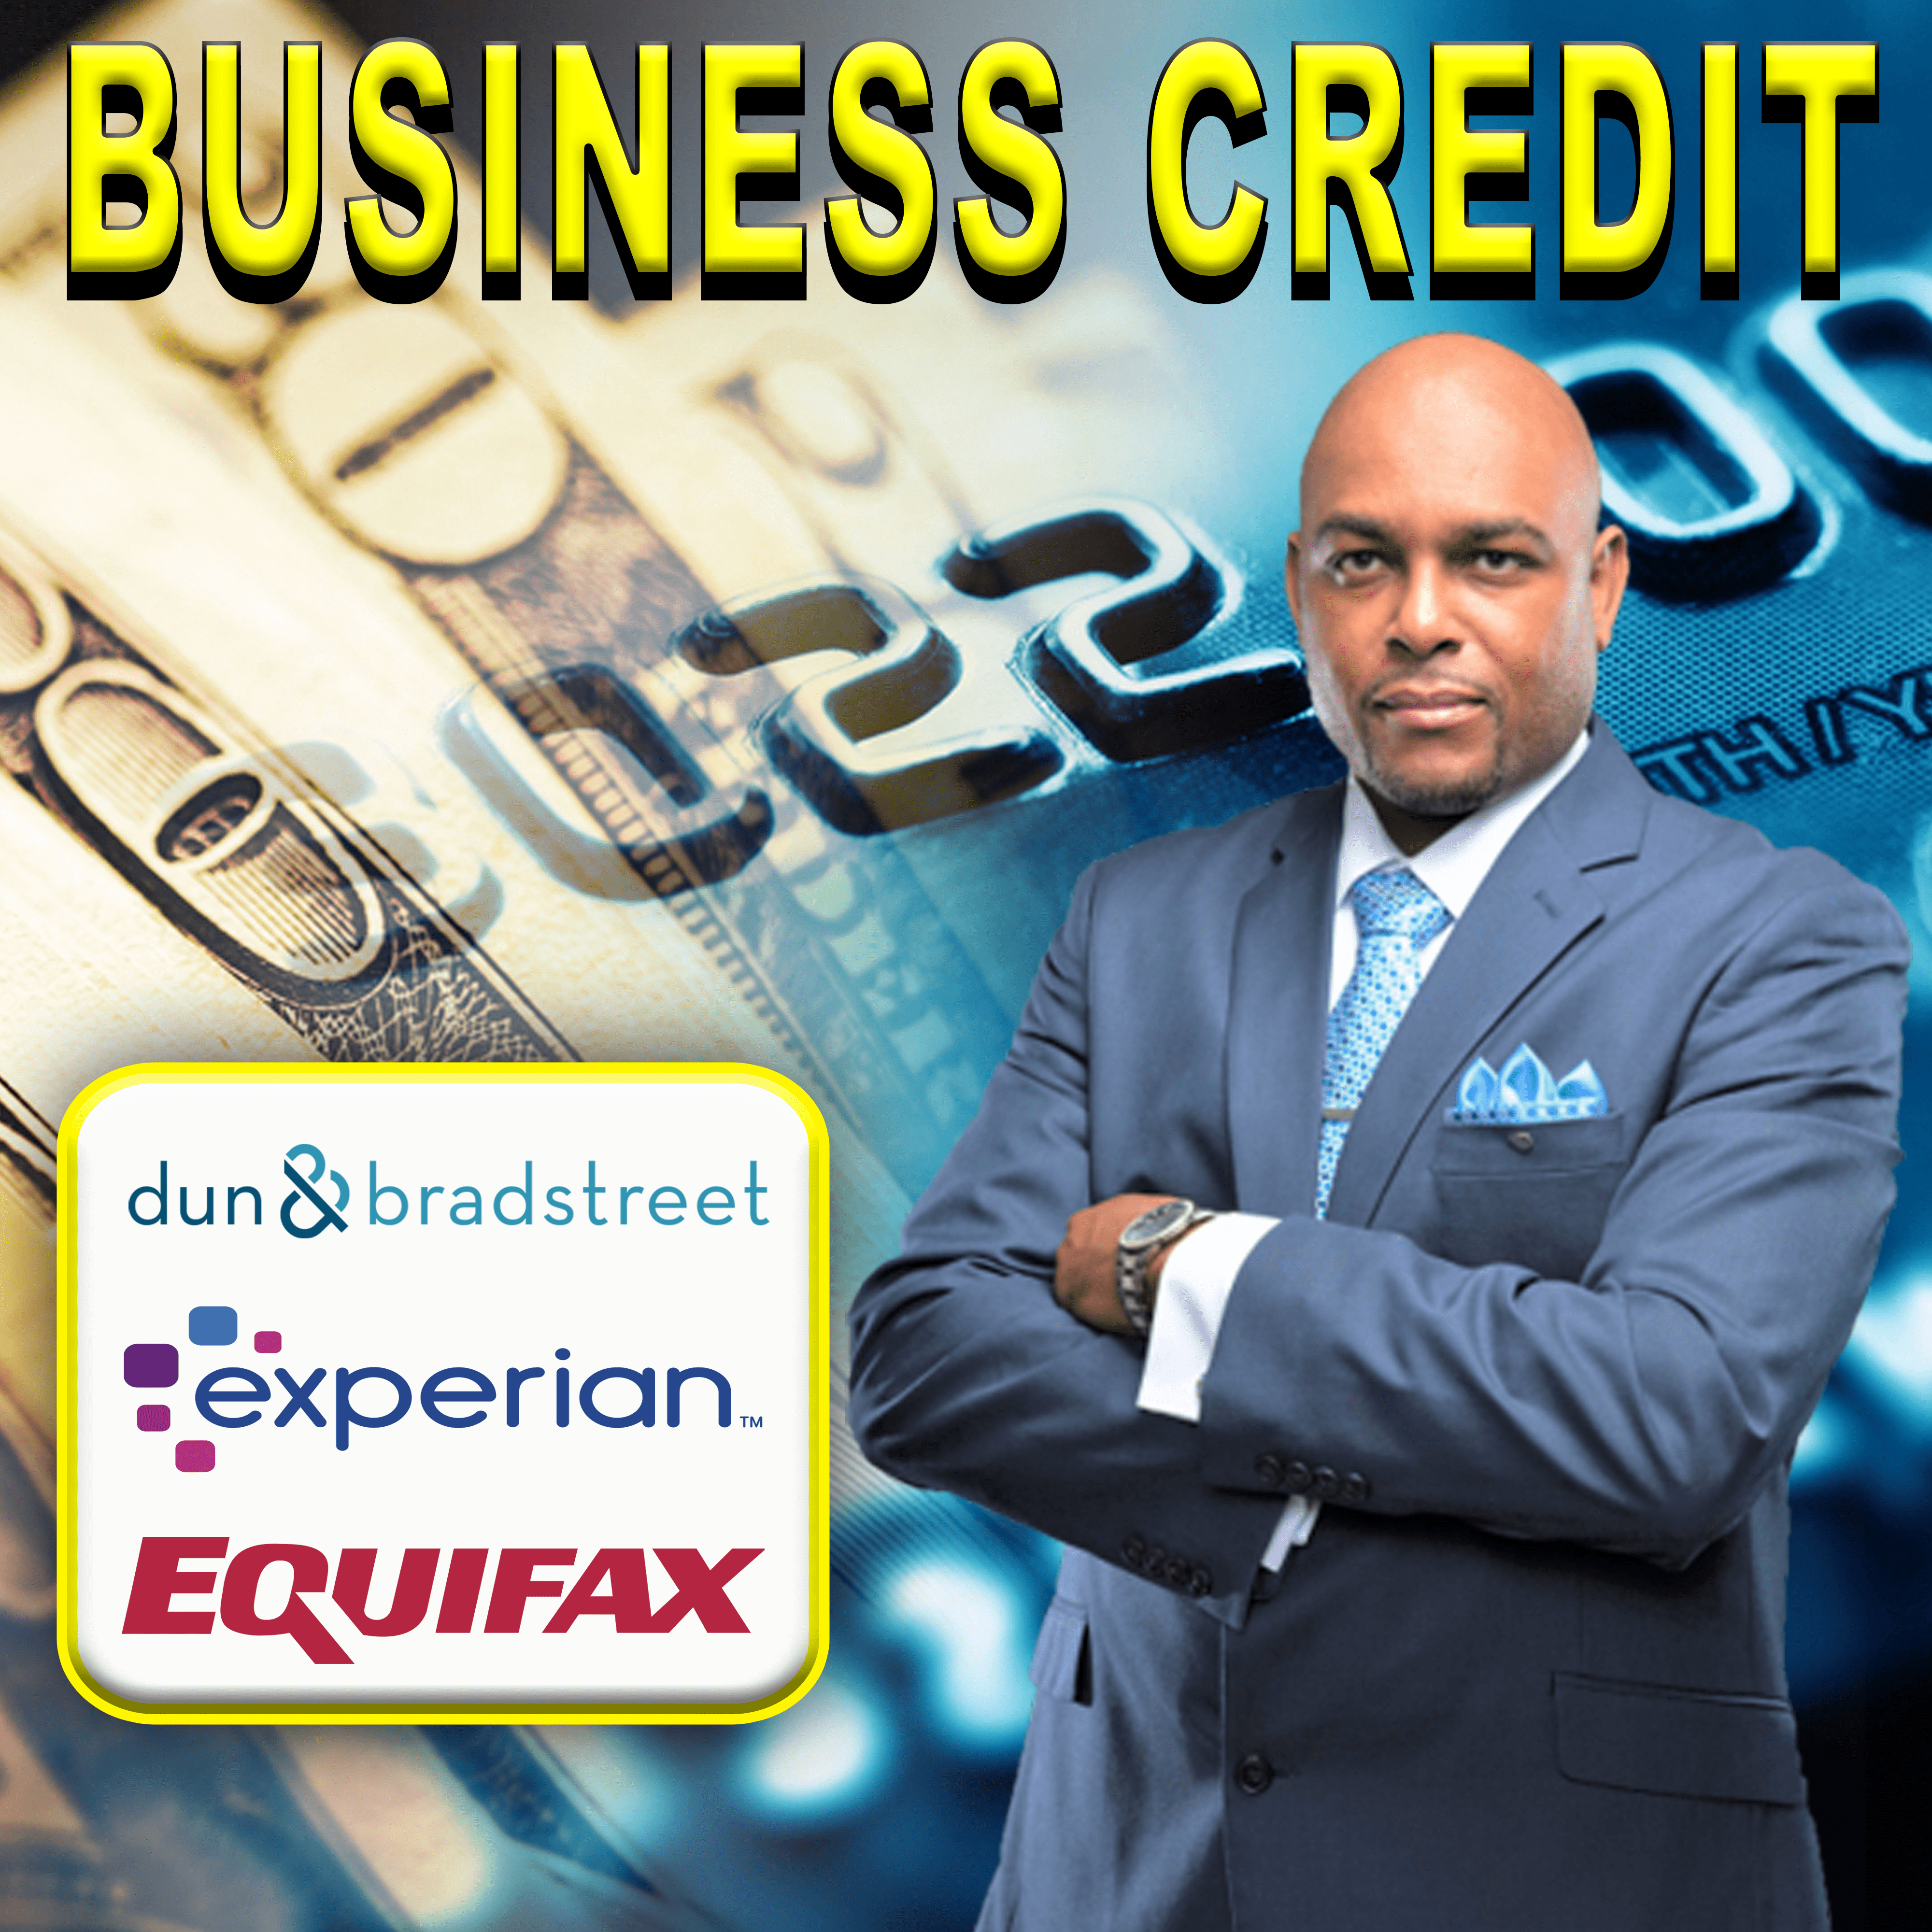 Business credit, the ability of a business to qualify for financing. Banks, lenders and suppliers rely on business credit reports to assess the creditworthiness